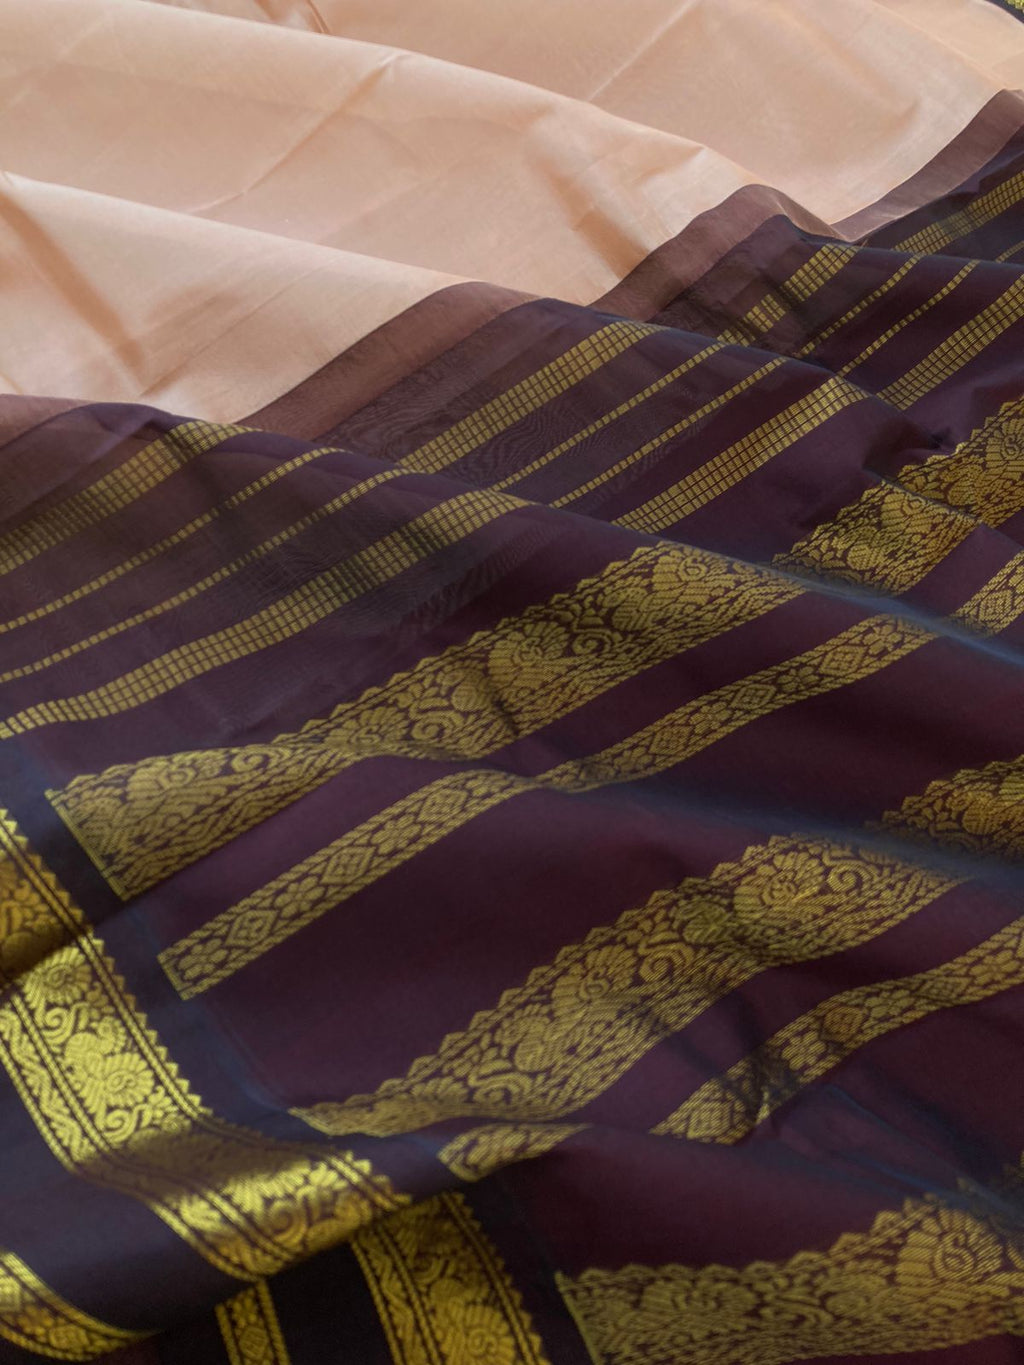 Korvai Silk Cottons - beautiful biscuit beige and coffee bean